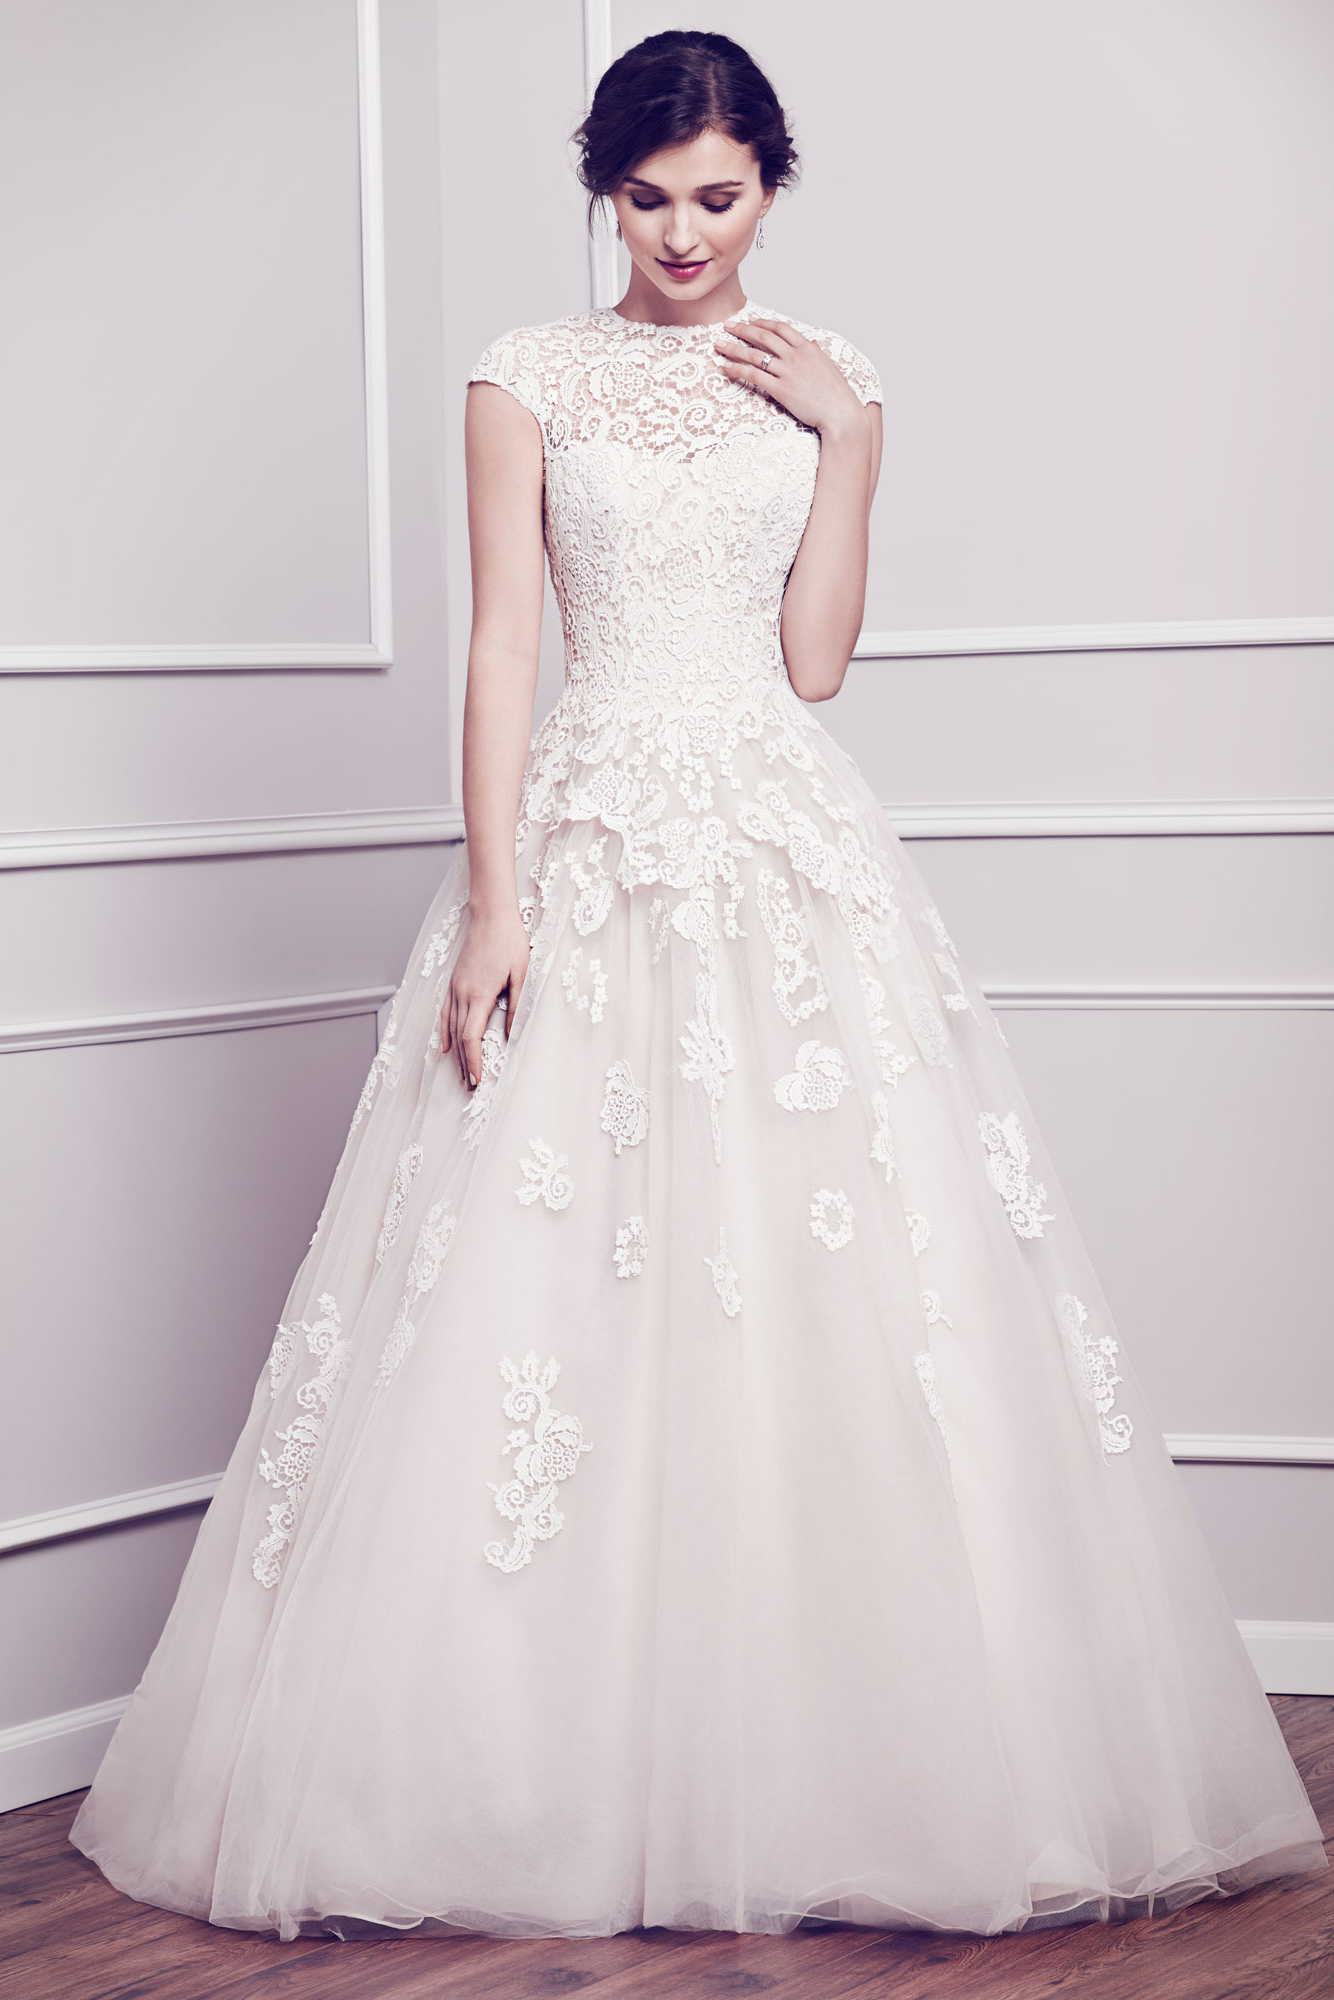 The 25 Most-Pinned Wedding Dresses Of 2015 | HuffPost